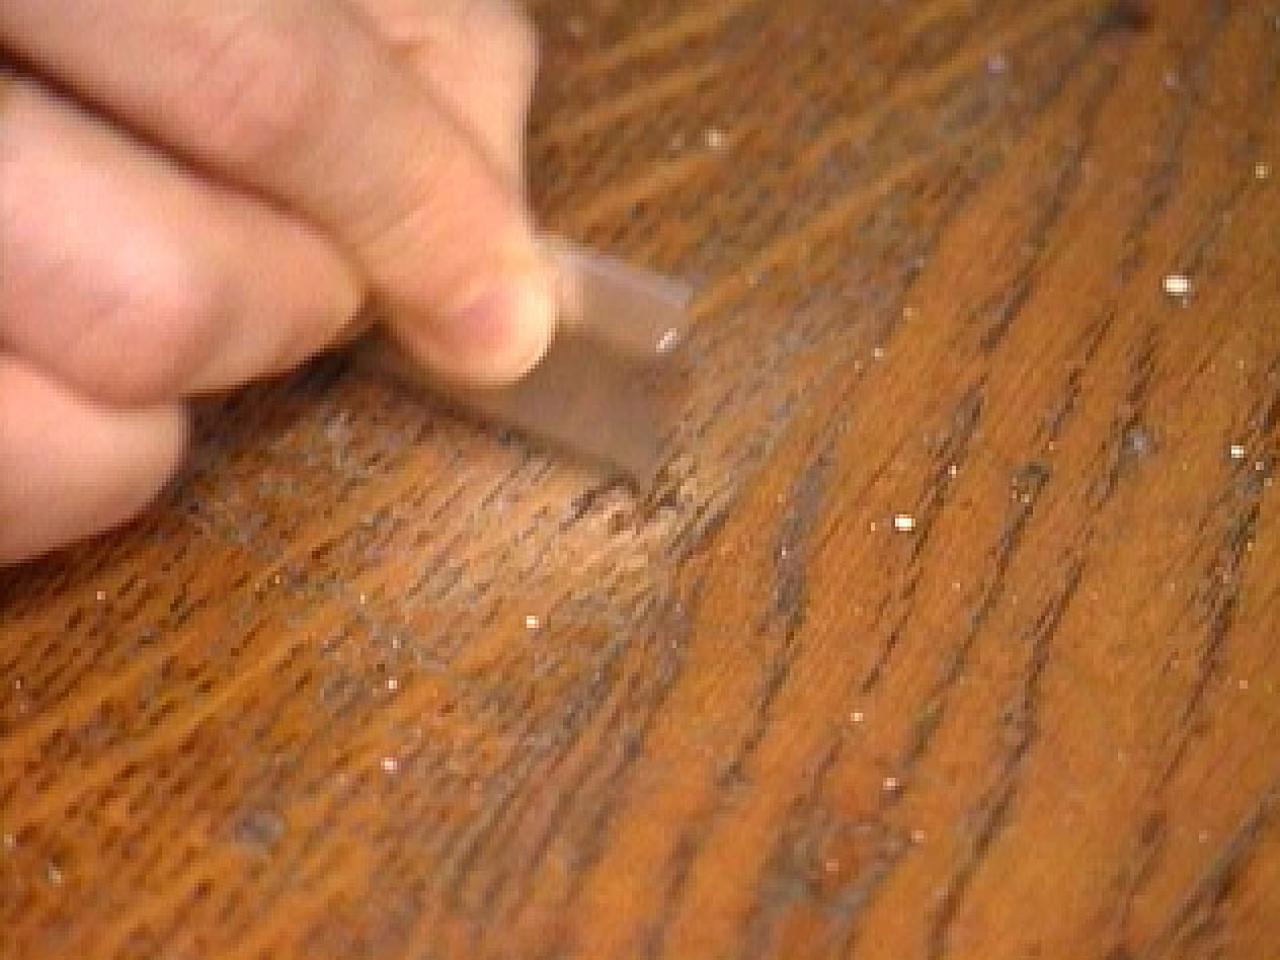 Remove Burn Marks On A Hardwood Floor, How To Remove Paint Spots From Laminate Flooring